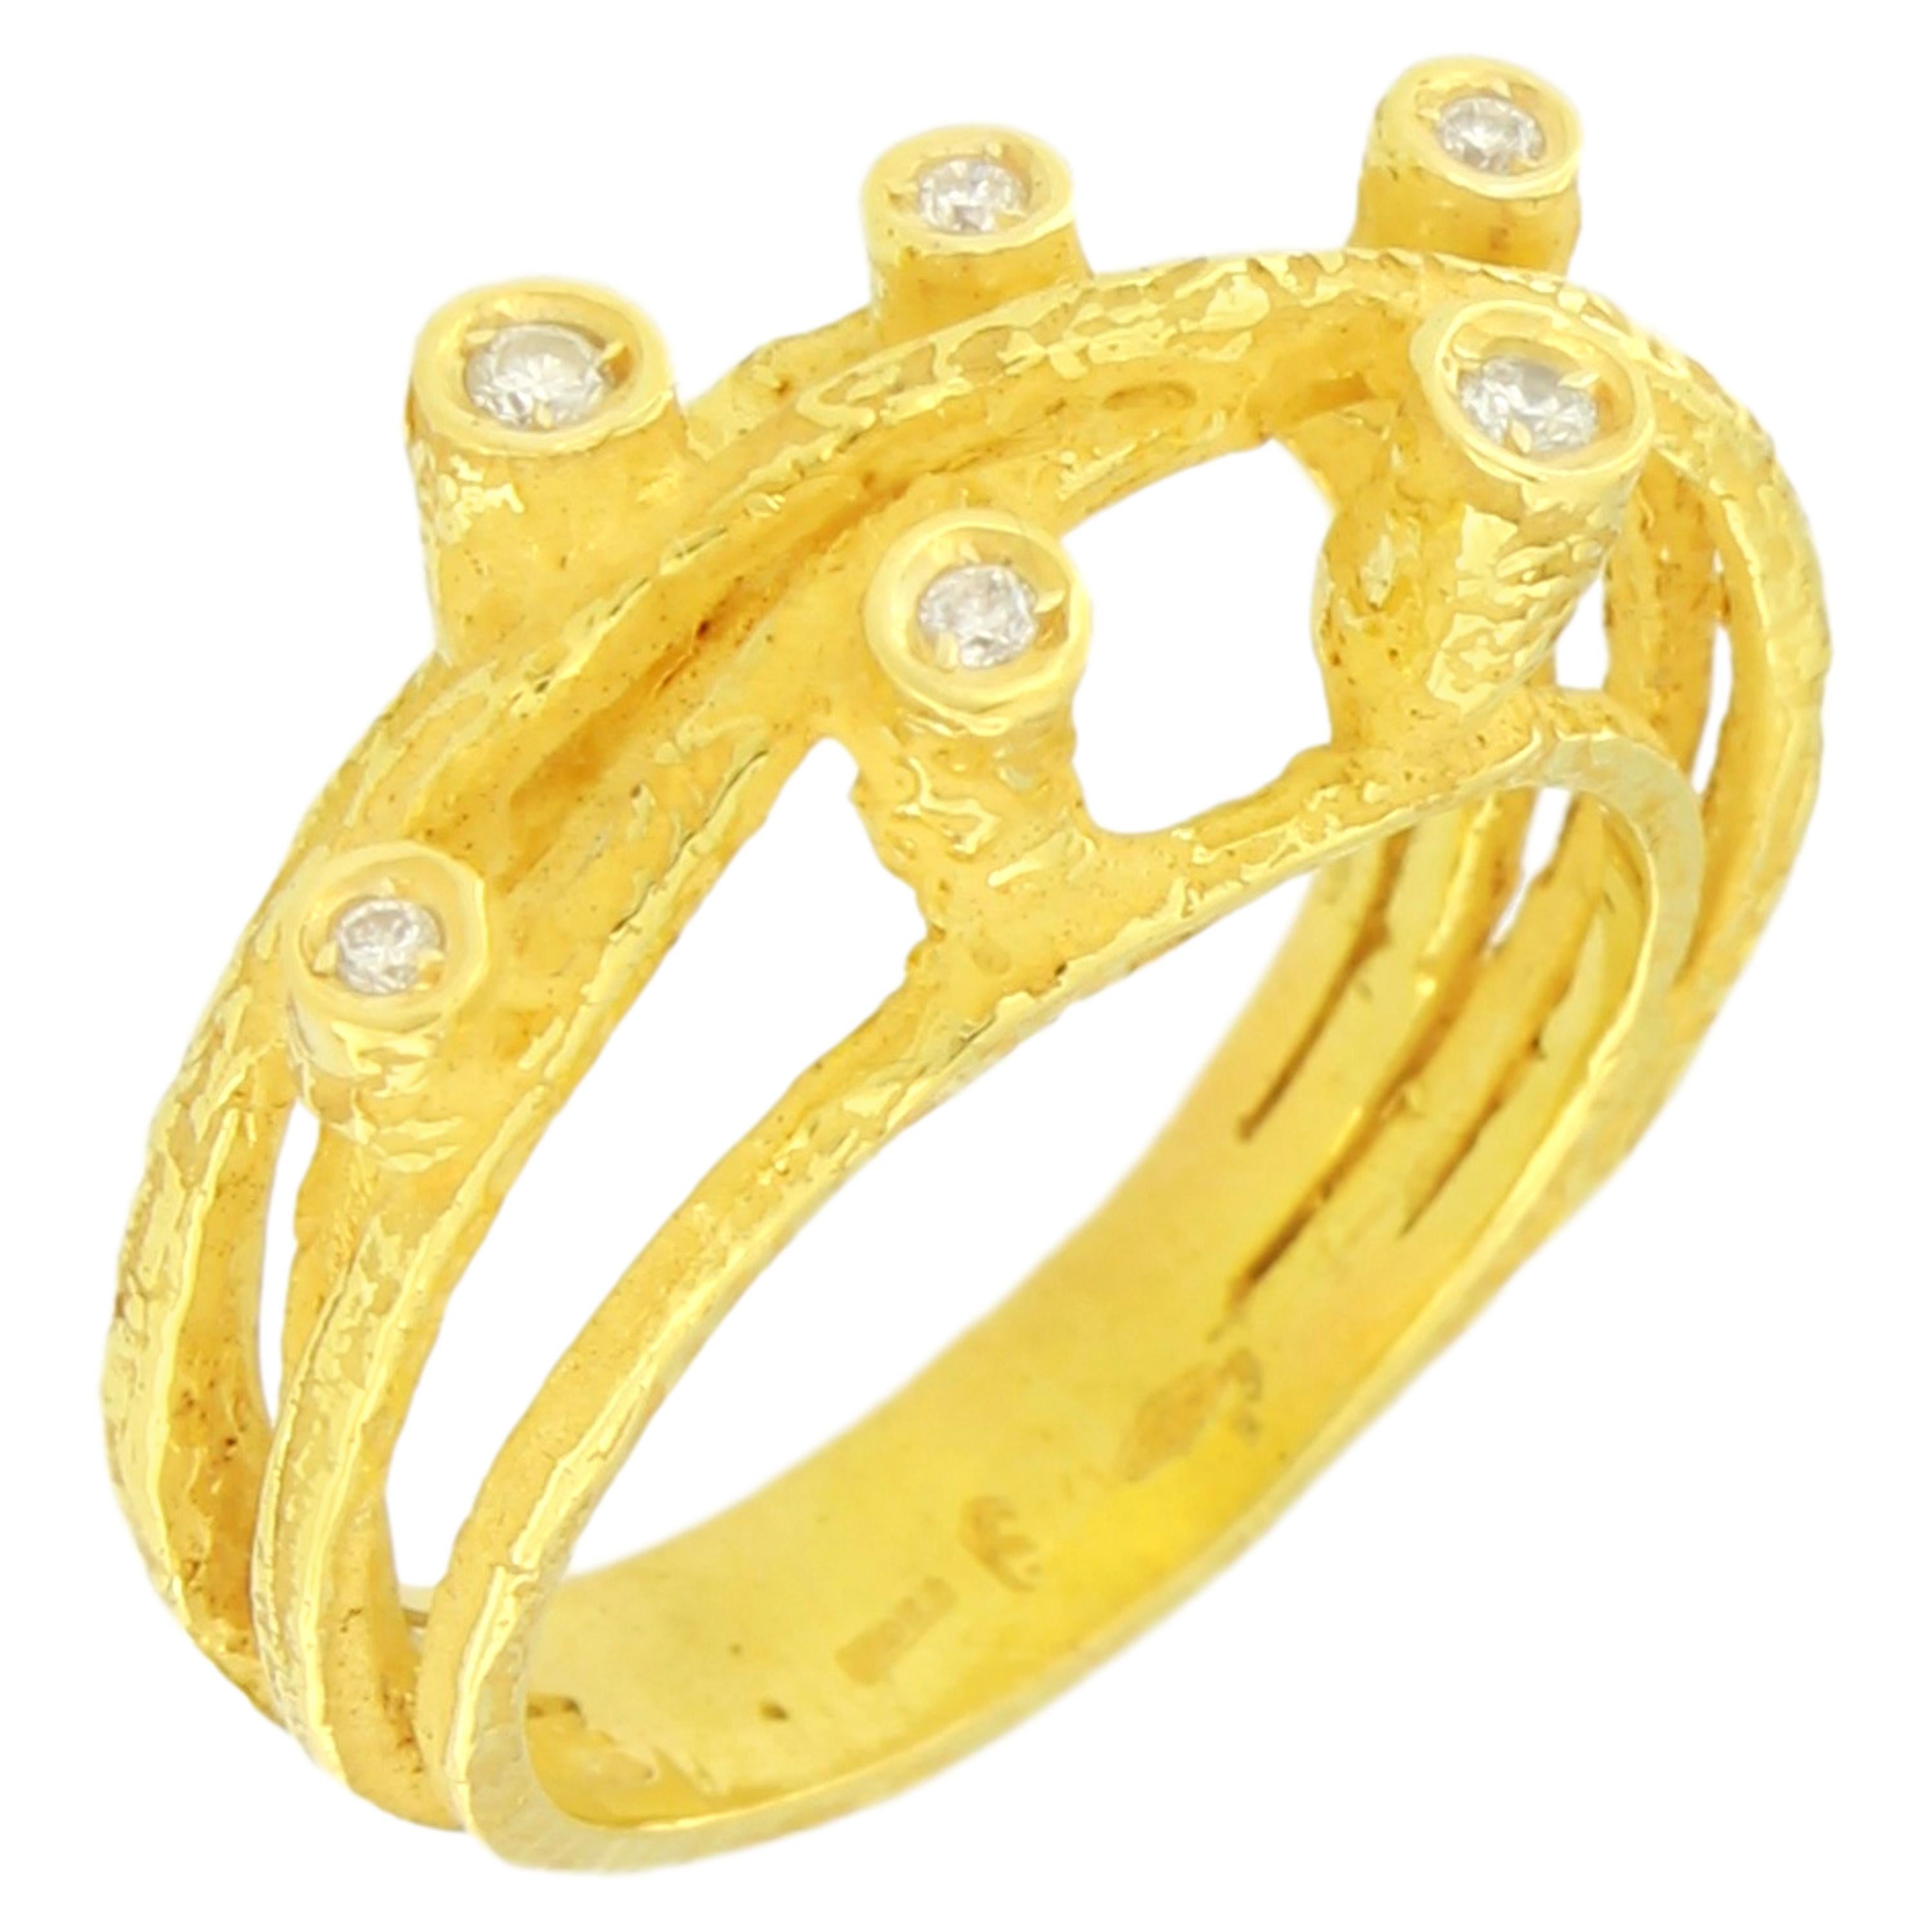 Lovely Wire Diamonds Satin Yellow Gold Fashion Ring, from Sacchi’s 